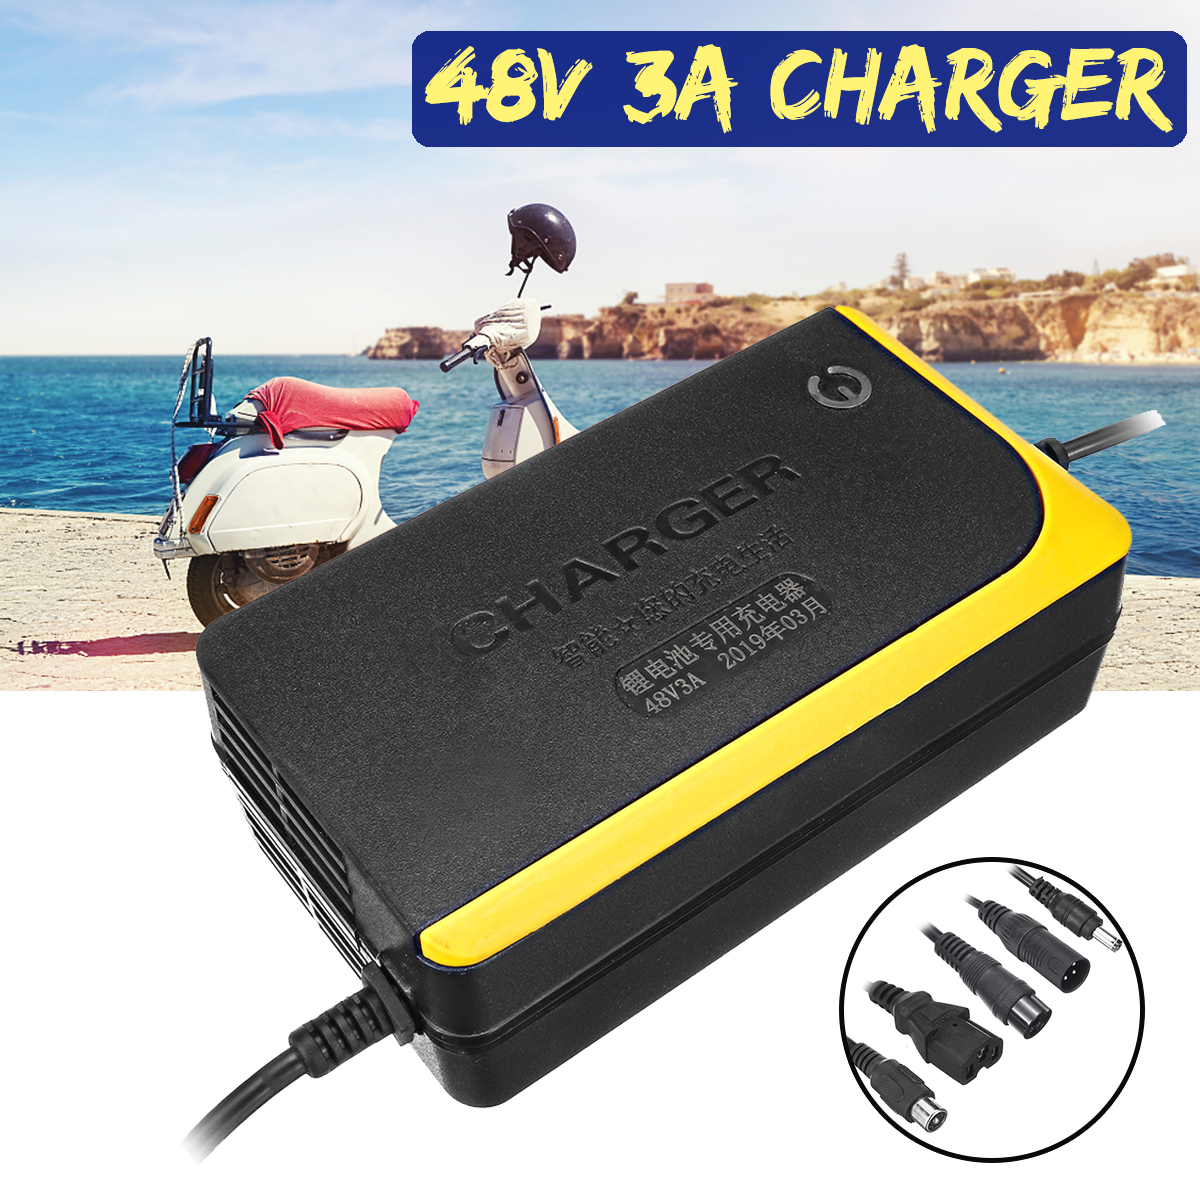 48V-3A-Lithium-Battery-Charger-For-Skateboard-Single-wheeled-Electric-Bicycle-1443394-1